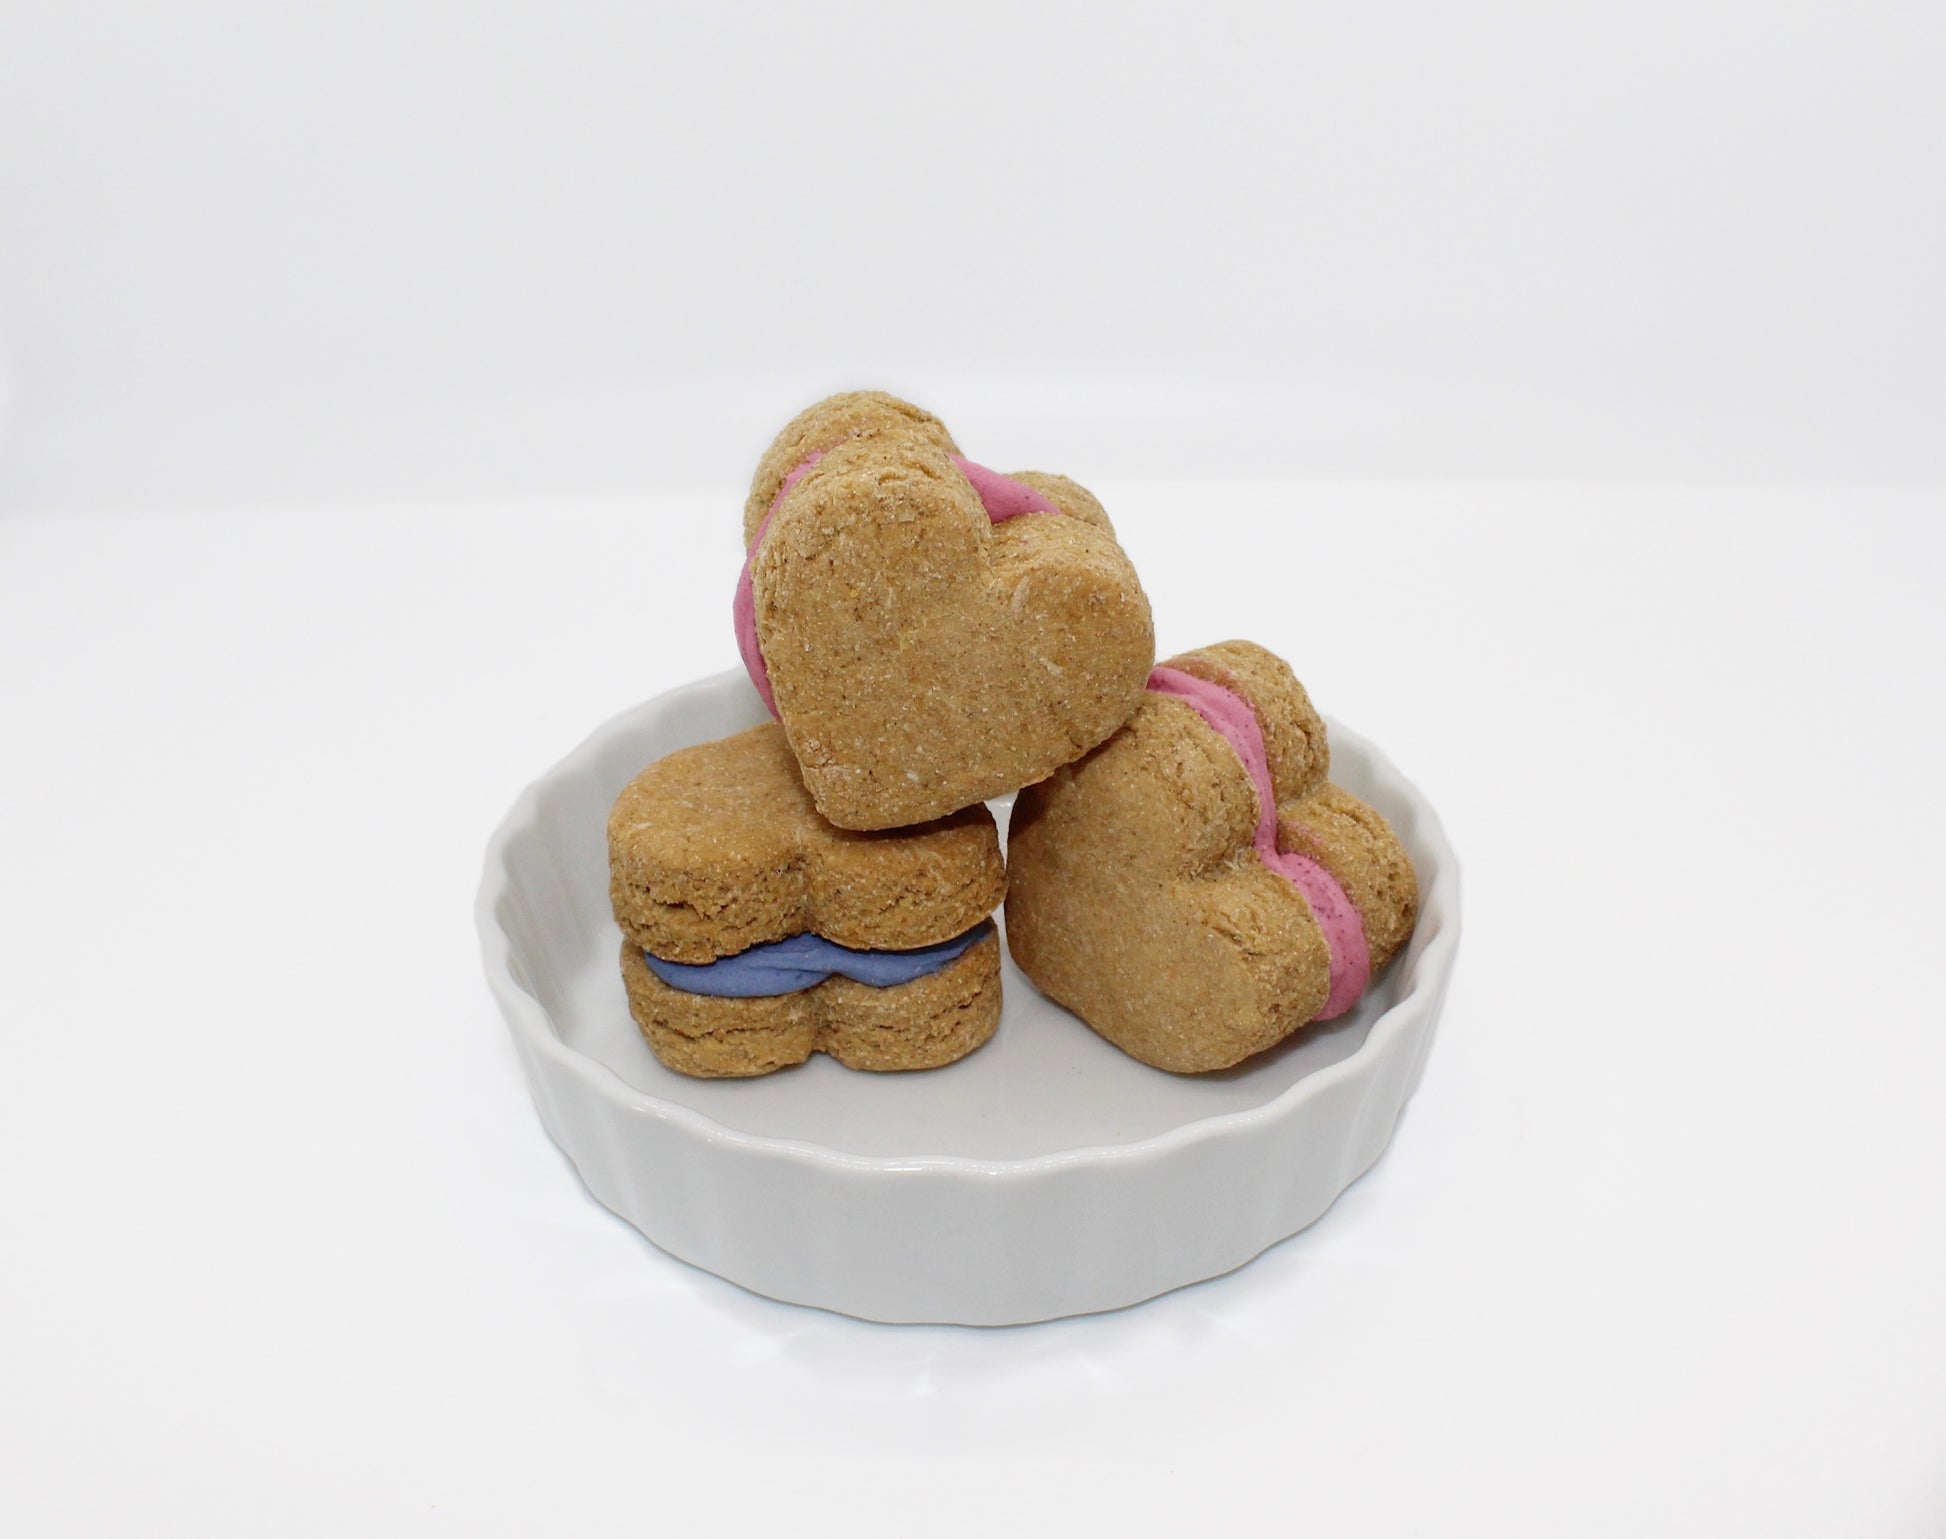 Three apple and banana flavored whoopie hearts displayed in a white dish. Two whoopie hearts have pink icing in the middle and one has blue icing.